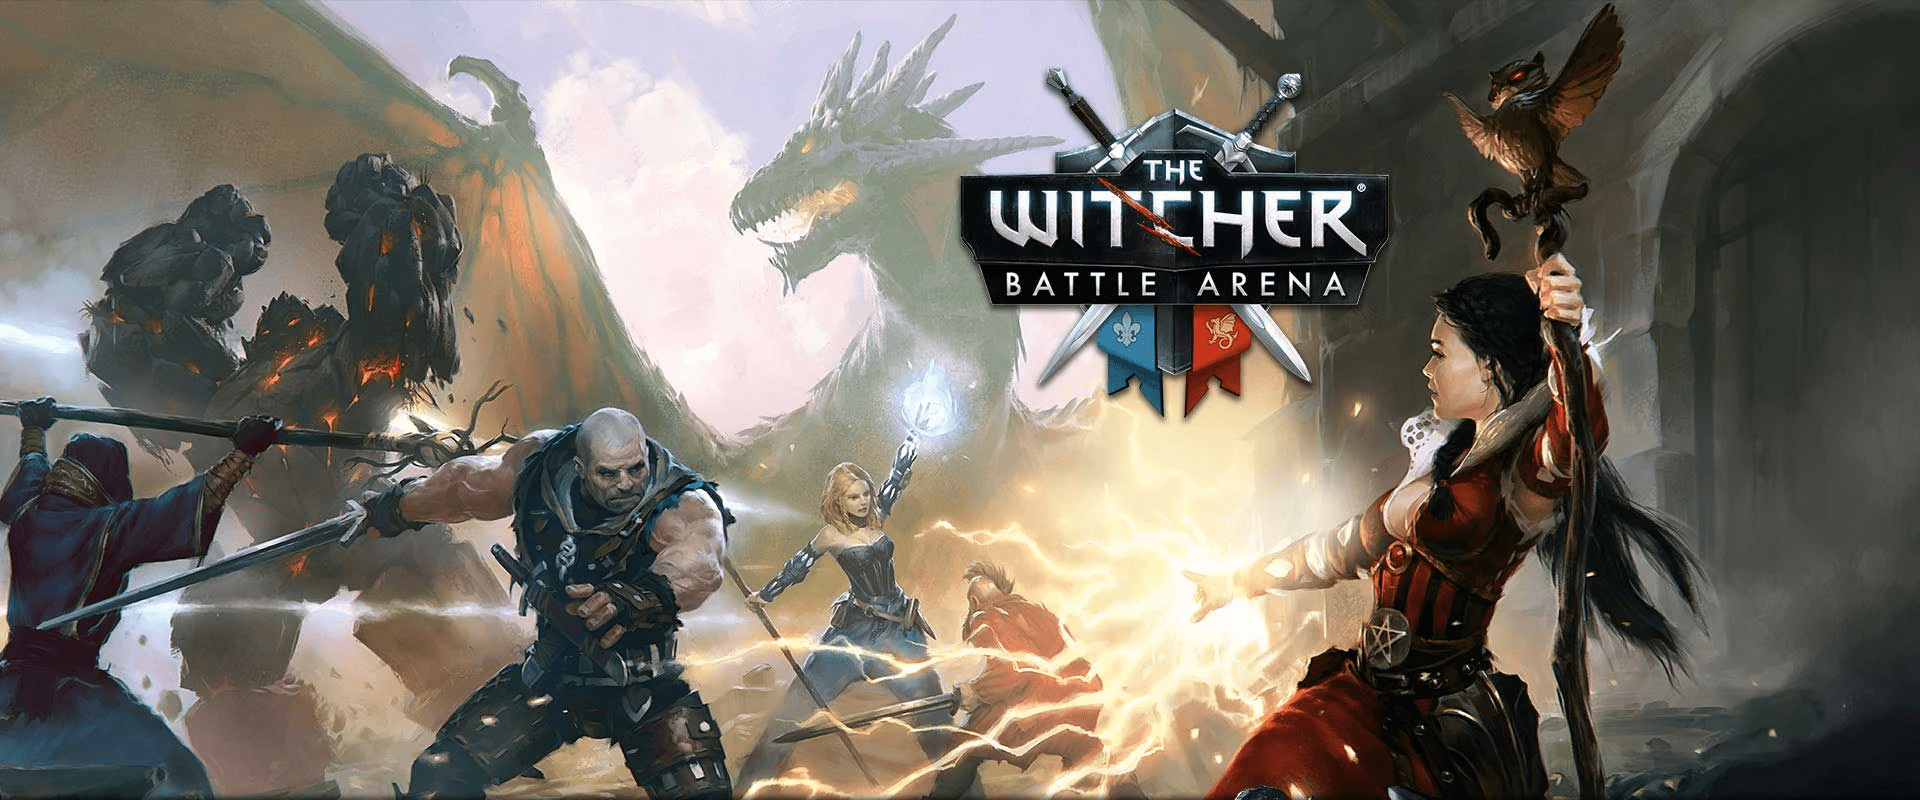 The Witcher Battle Arena Cover